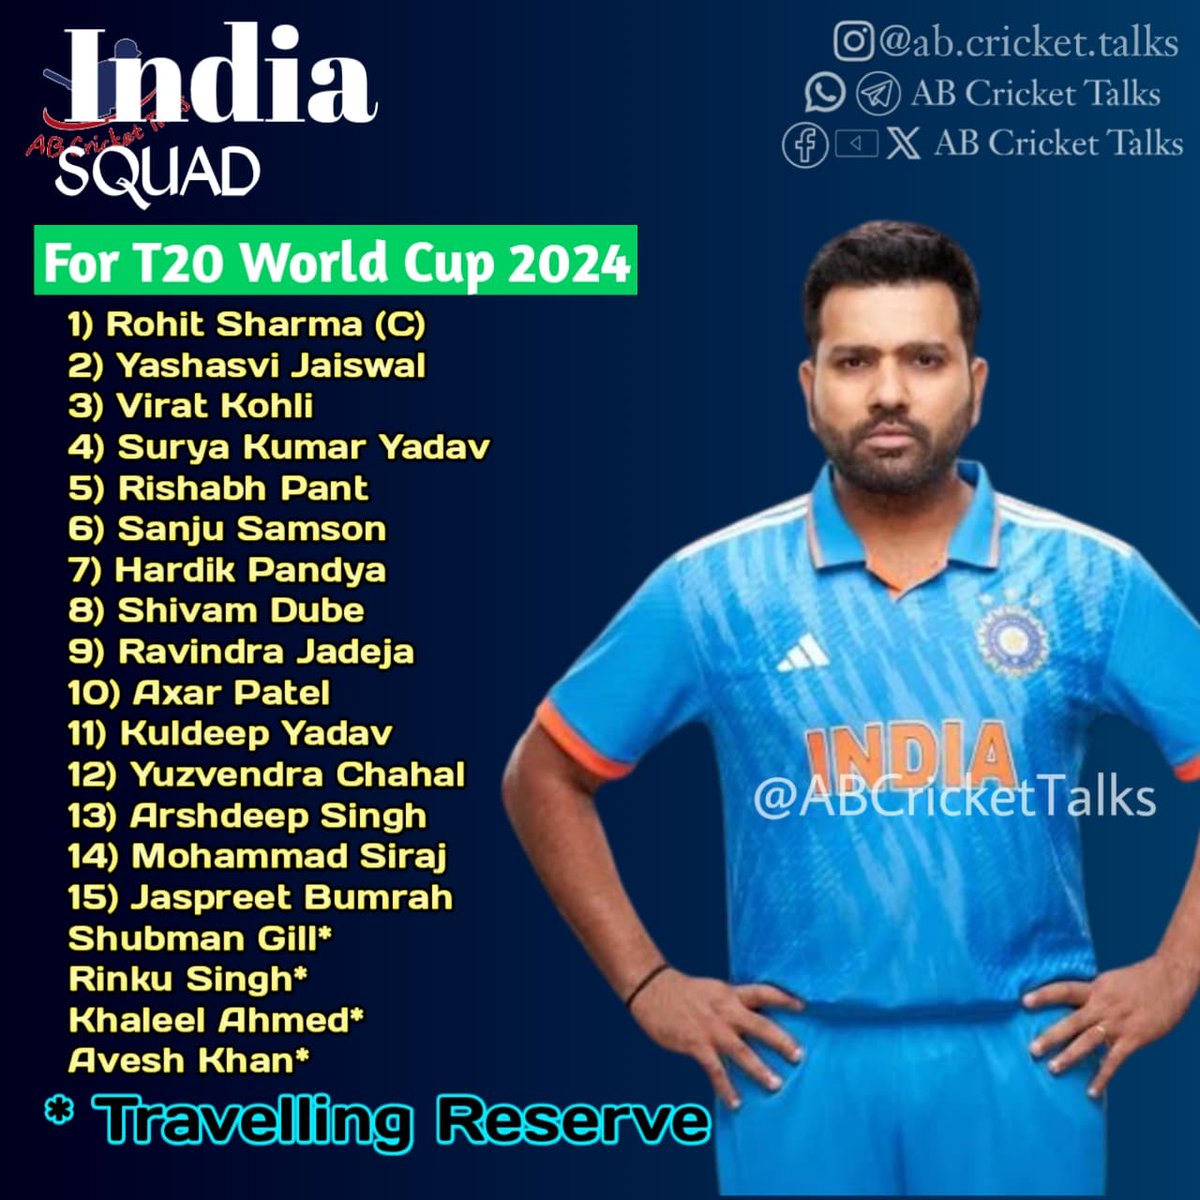 Here is the Squad for the Indian Team for the Upcomming T20 World Cup....
Sanju Samson and Yuzvendra Chahal included in the WC Squad

#ABCricketTalks #CricketTalksWithArpit 

#RohitSharma𓃵 #IndianTeam  #RohitBirthdayCDP #india #bcci #SanjuSamson #YuzvendraChahal